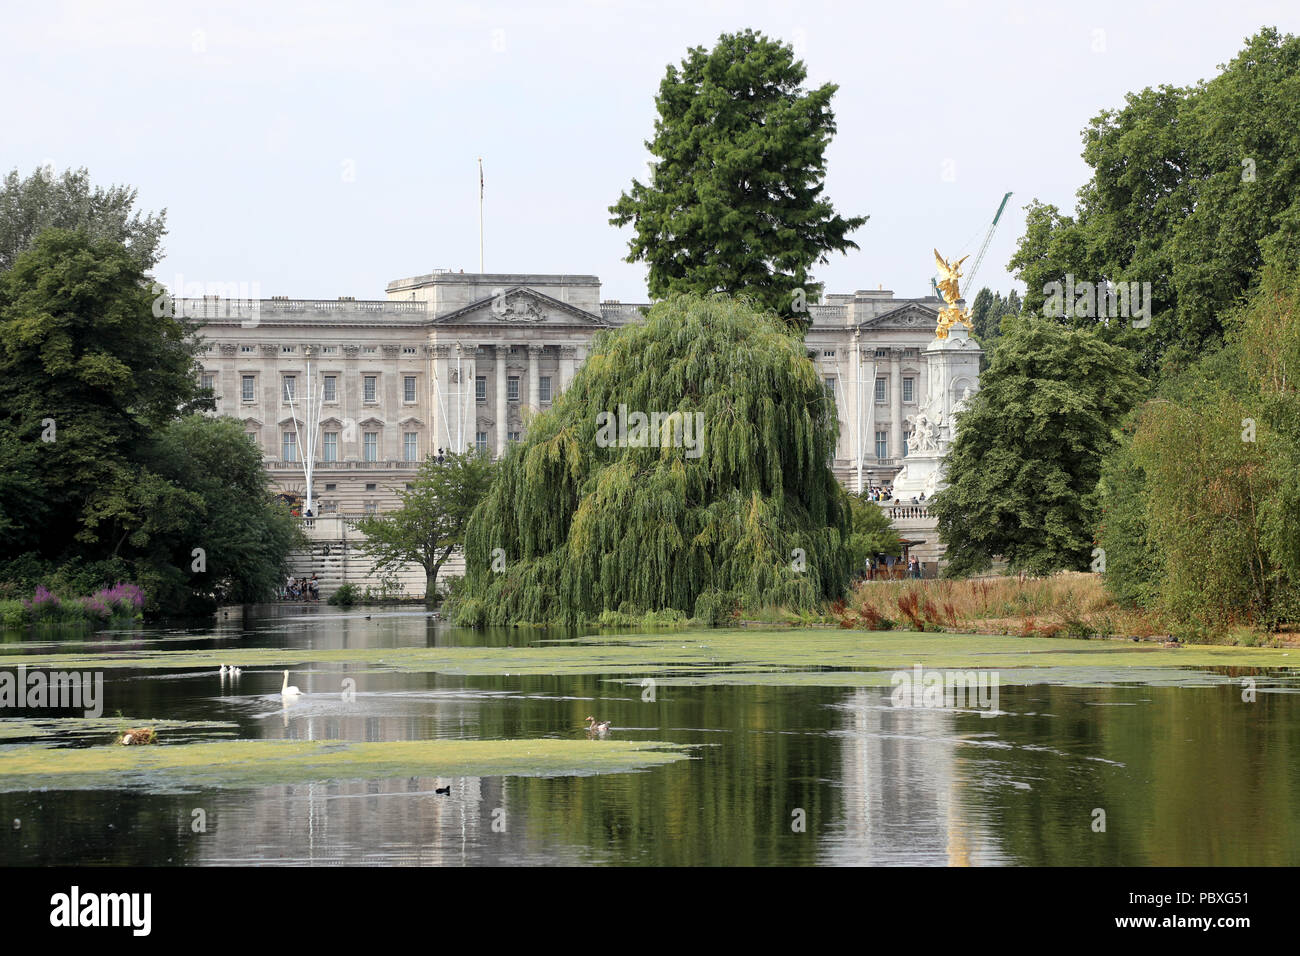 London / UK - July 26 2018: View of Buckingham Palace the home of the British monarch, through the trees of St James Park in central London Stock Photo